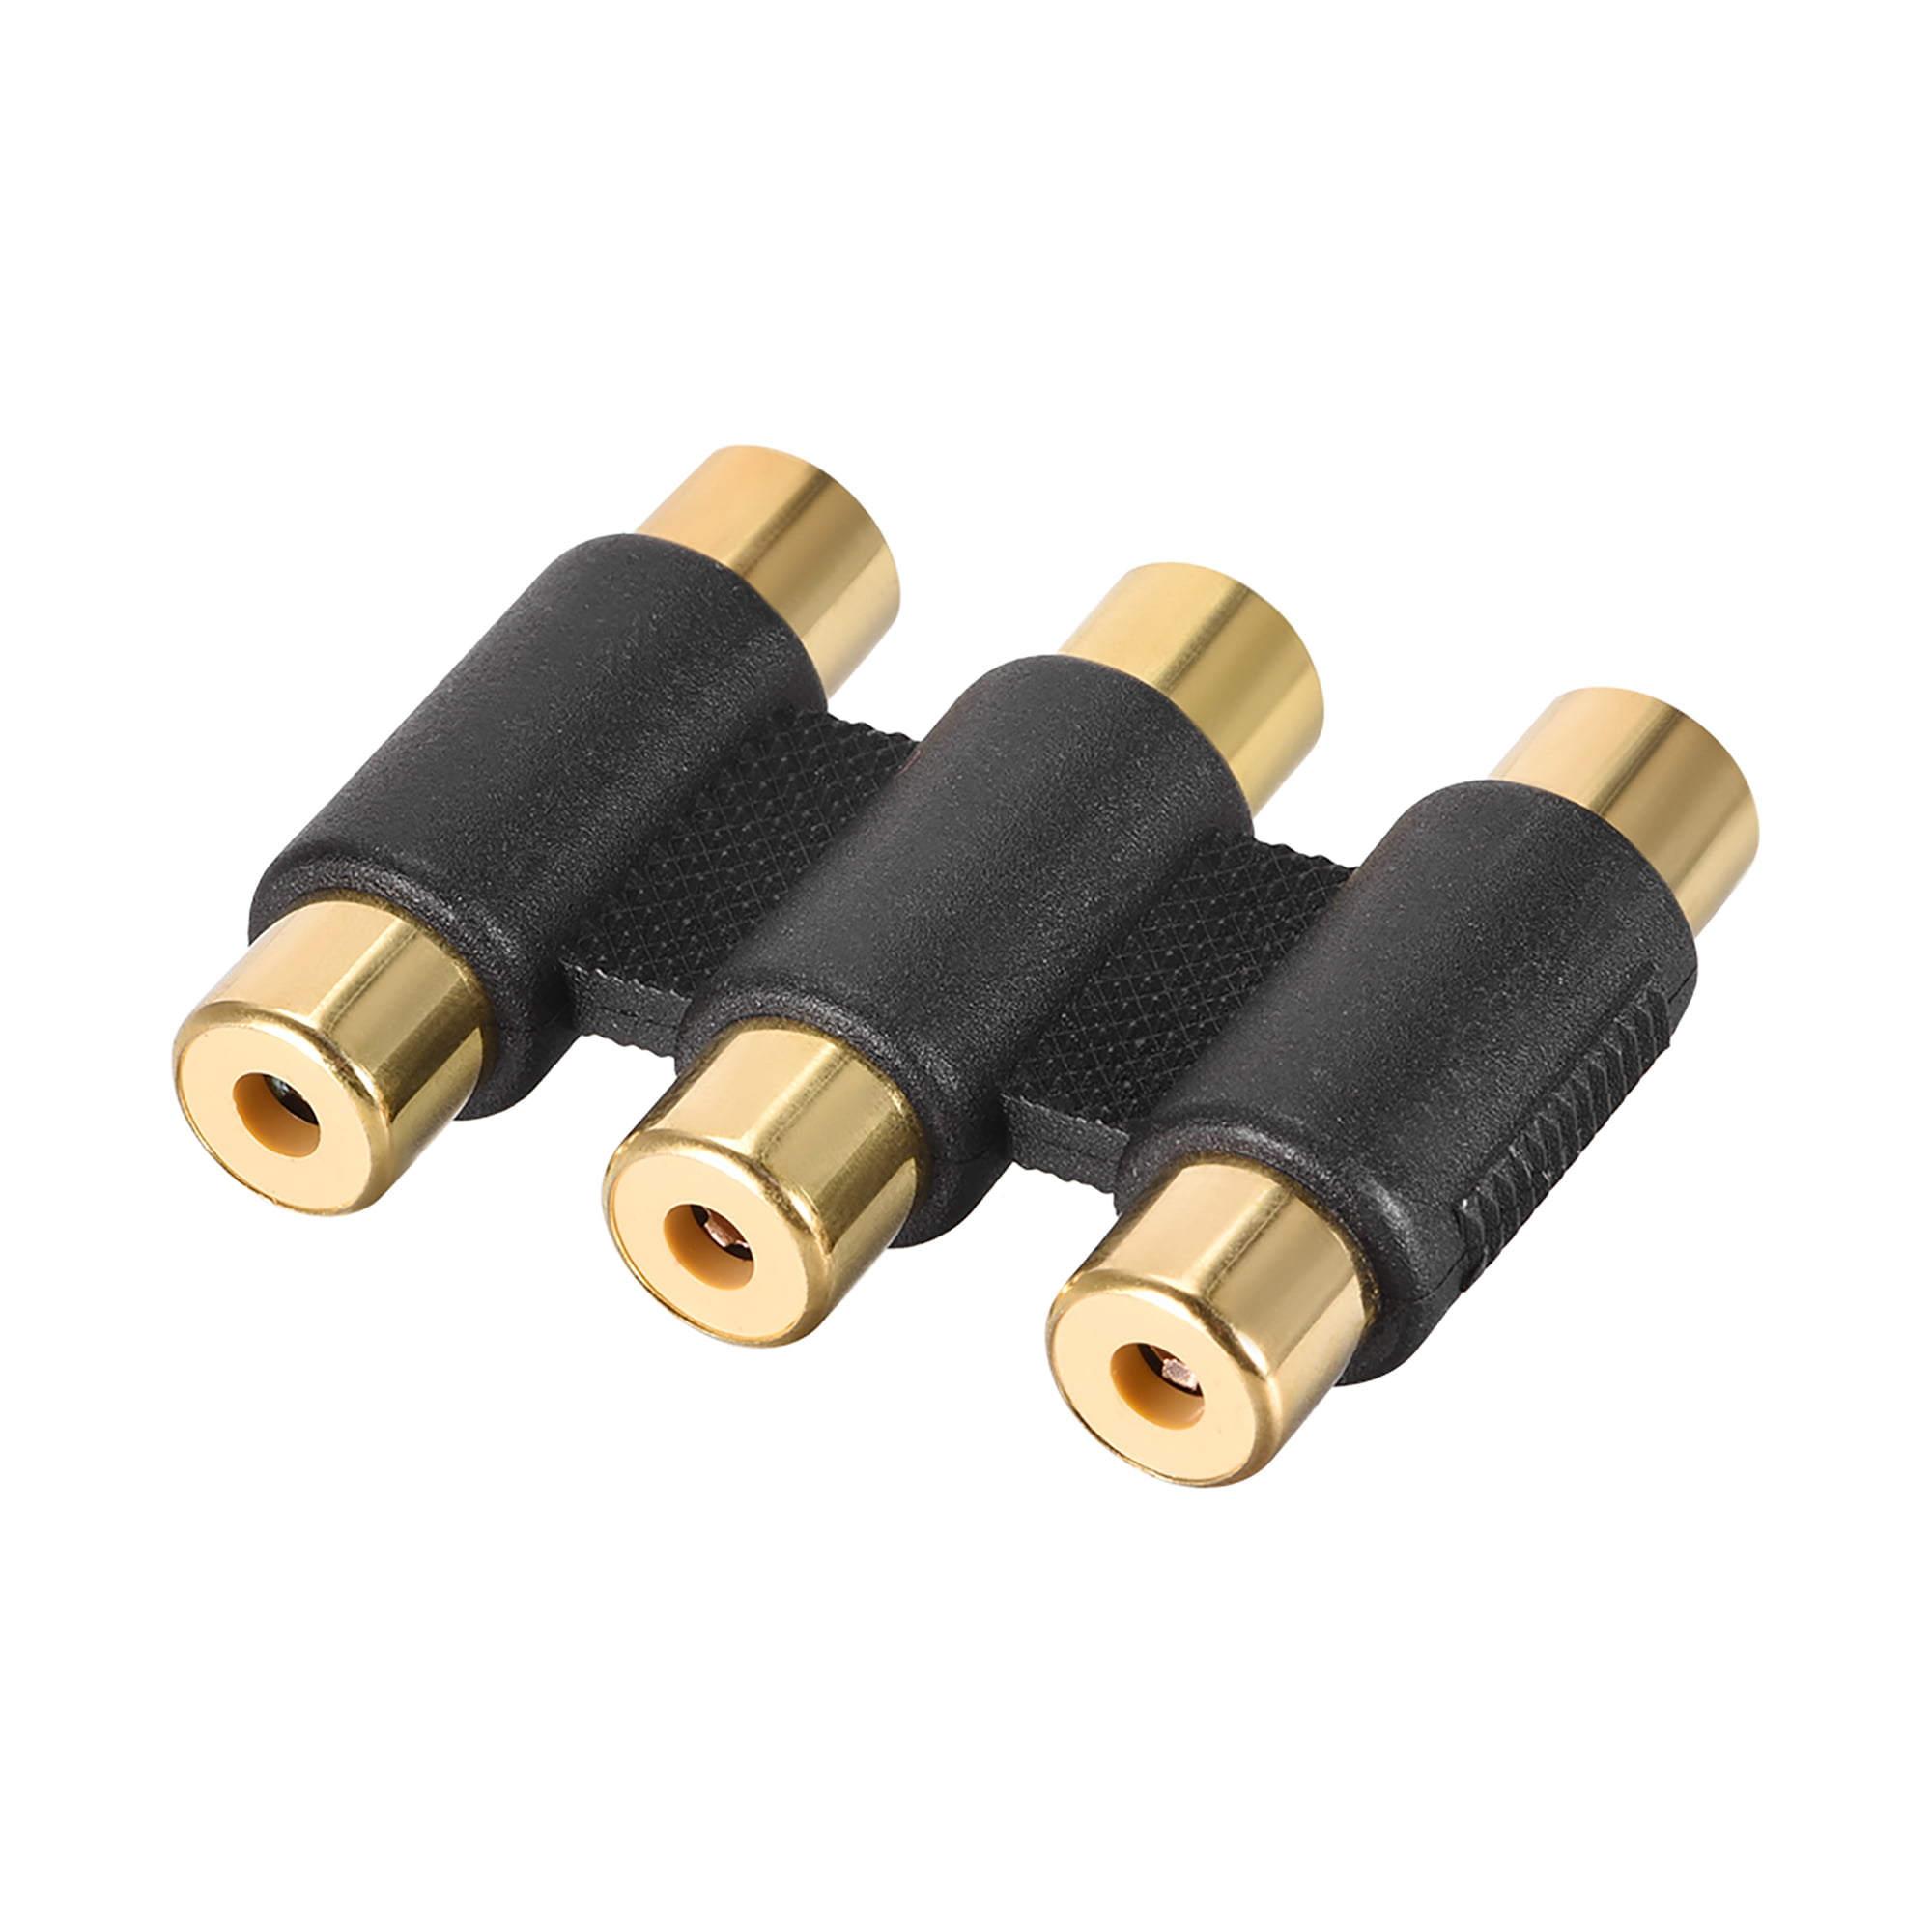 RCA male to 2 RCA female stereo audio connector video splitter adapter coupler brass gold plated 3 pieces